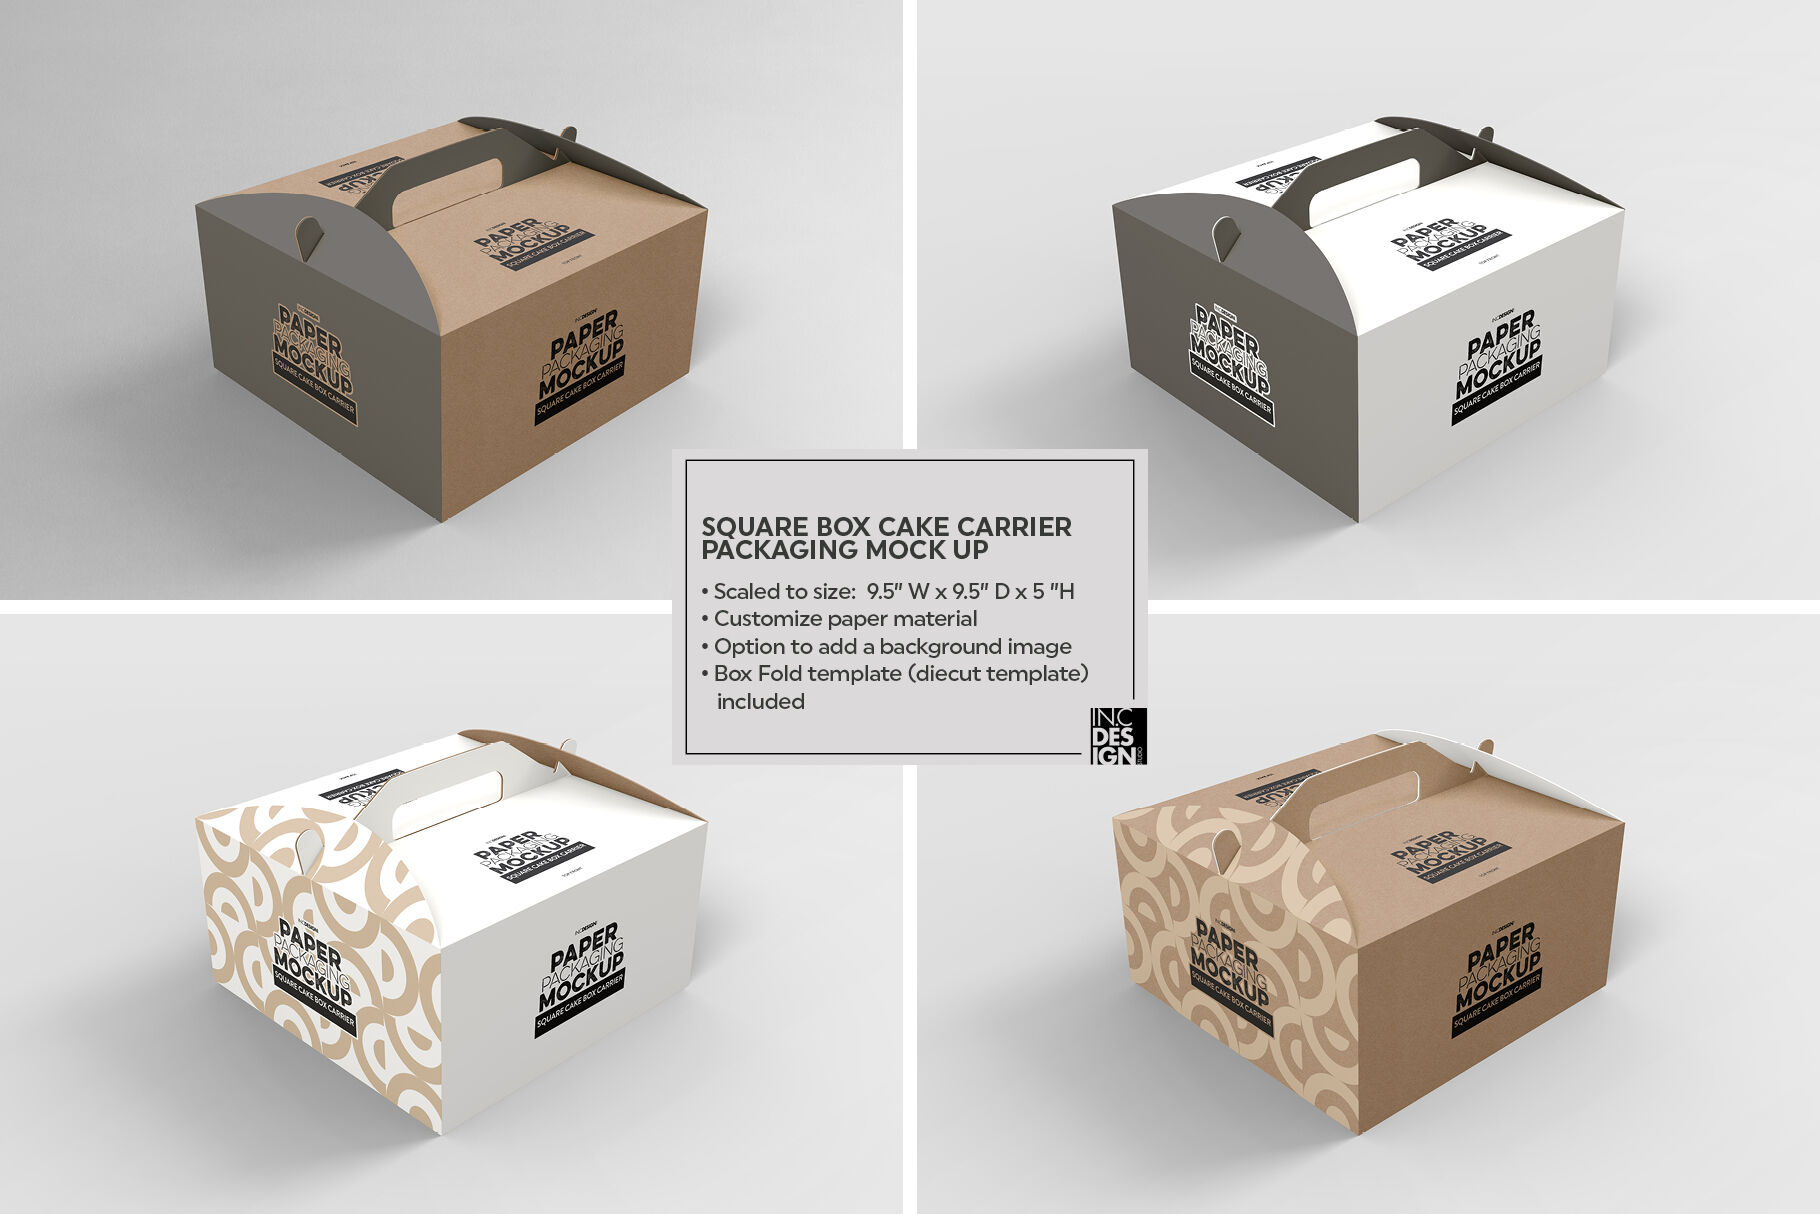 Download Square Cake Box Carrier Packaging MockUp By INC Design ...